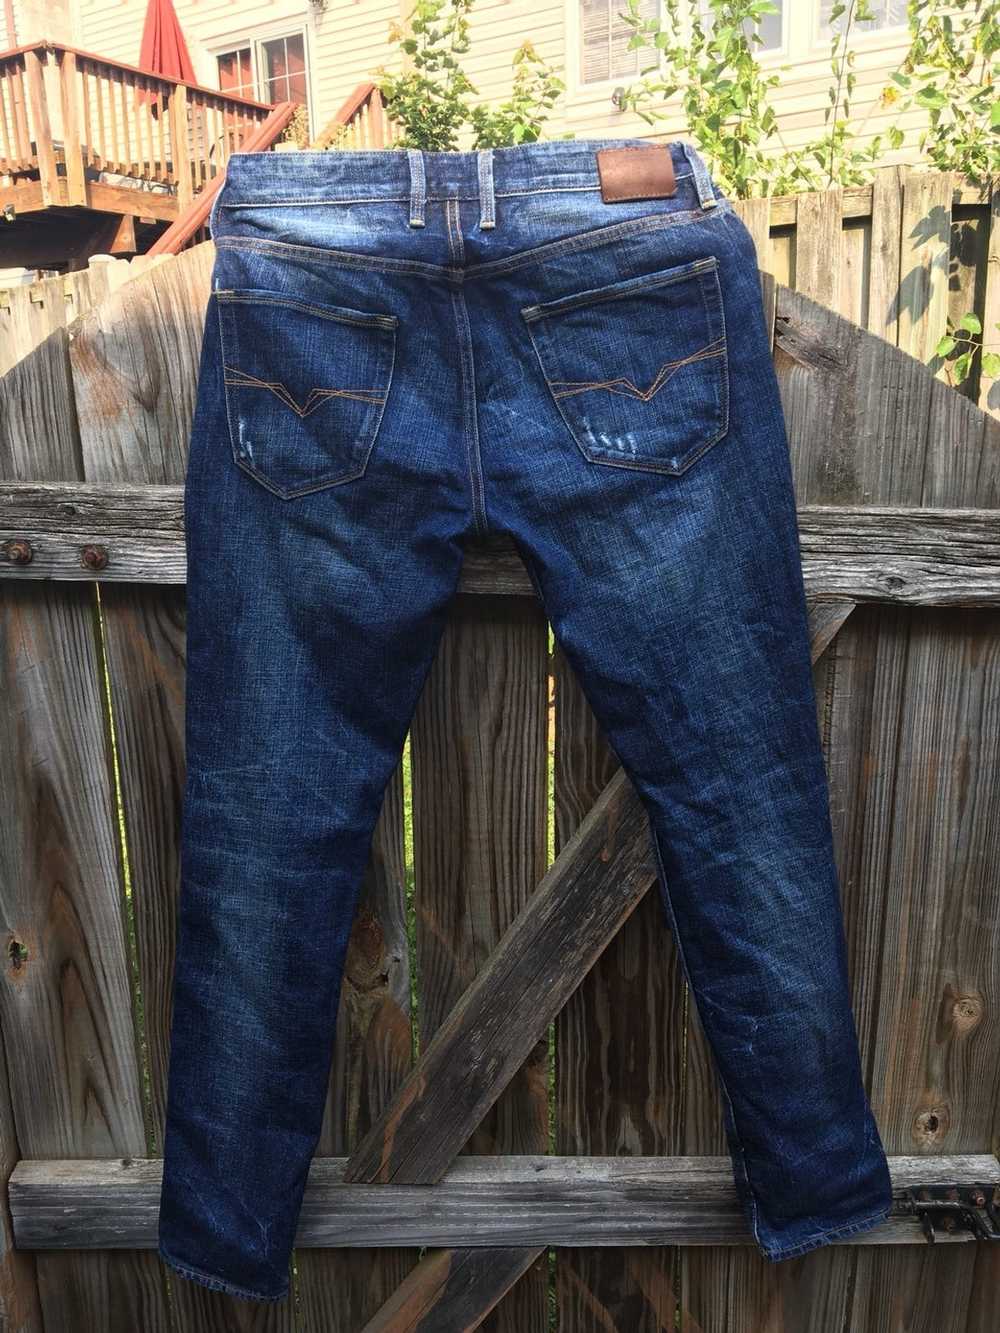 Guess Slim Tapered Raw Denim Jeans - image 2